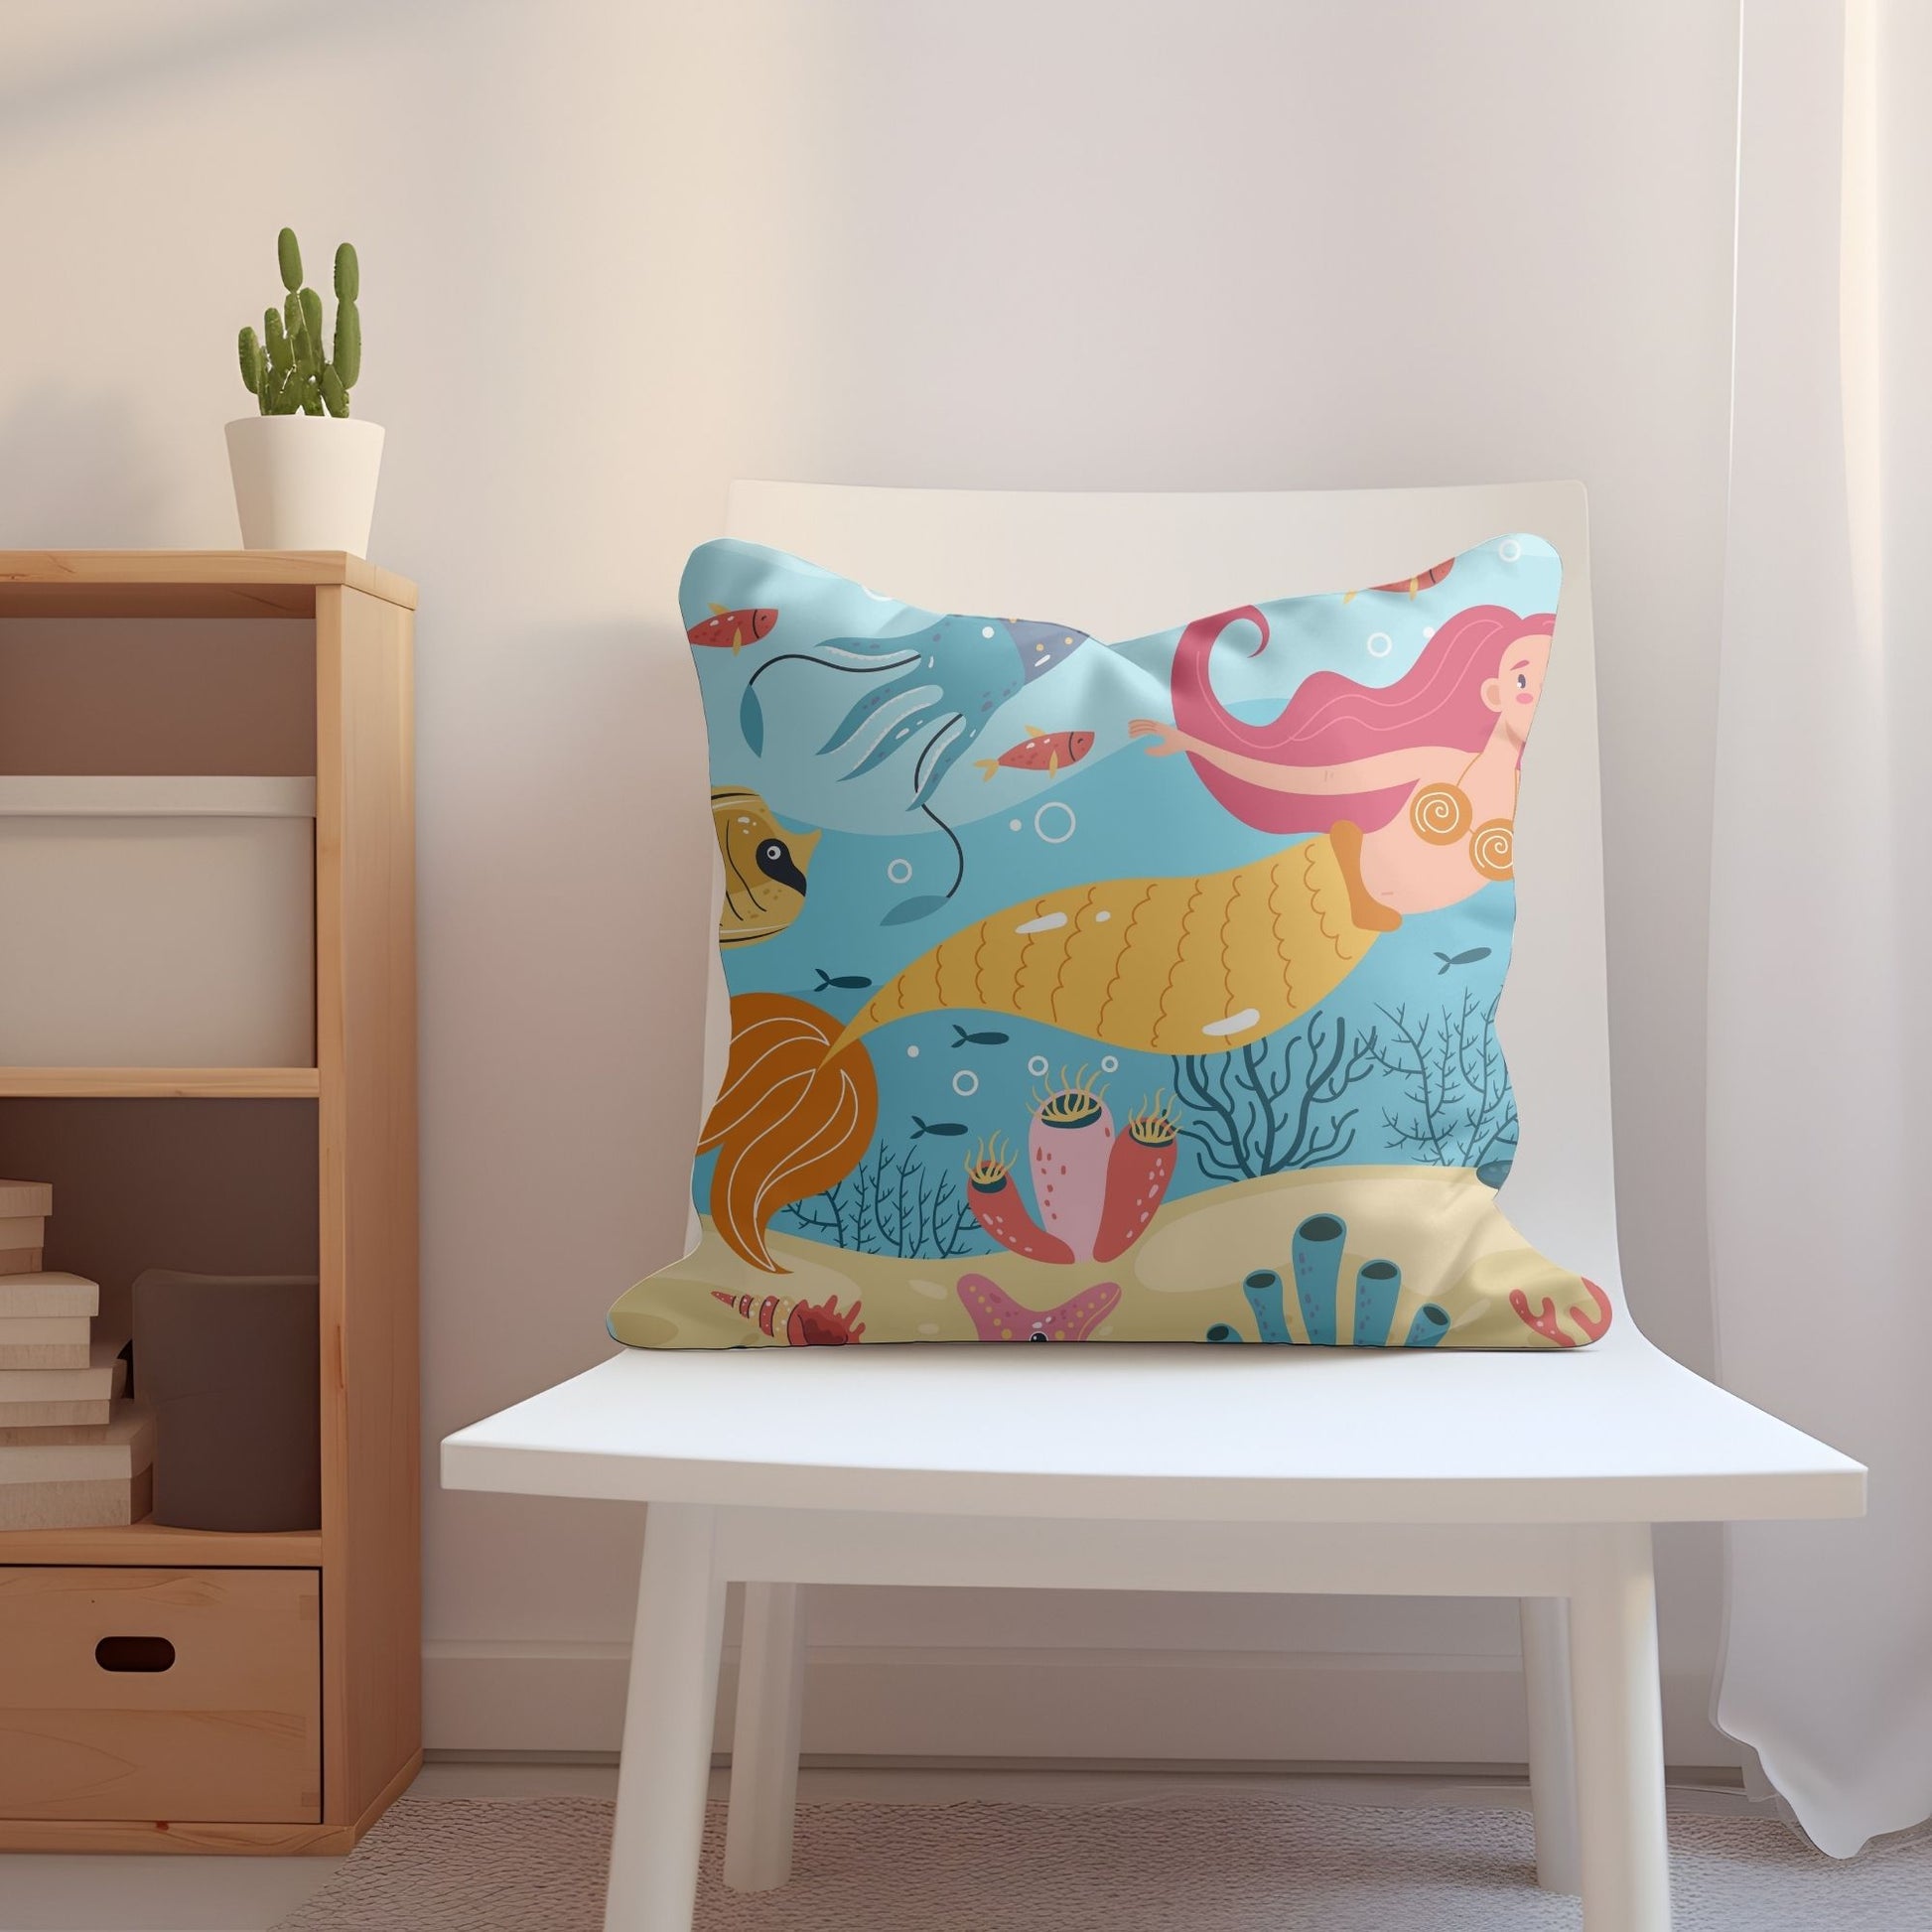 Adorable mermaid patterned pillow perfect for baby's nursery.